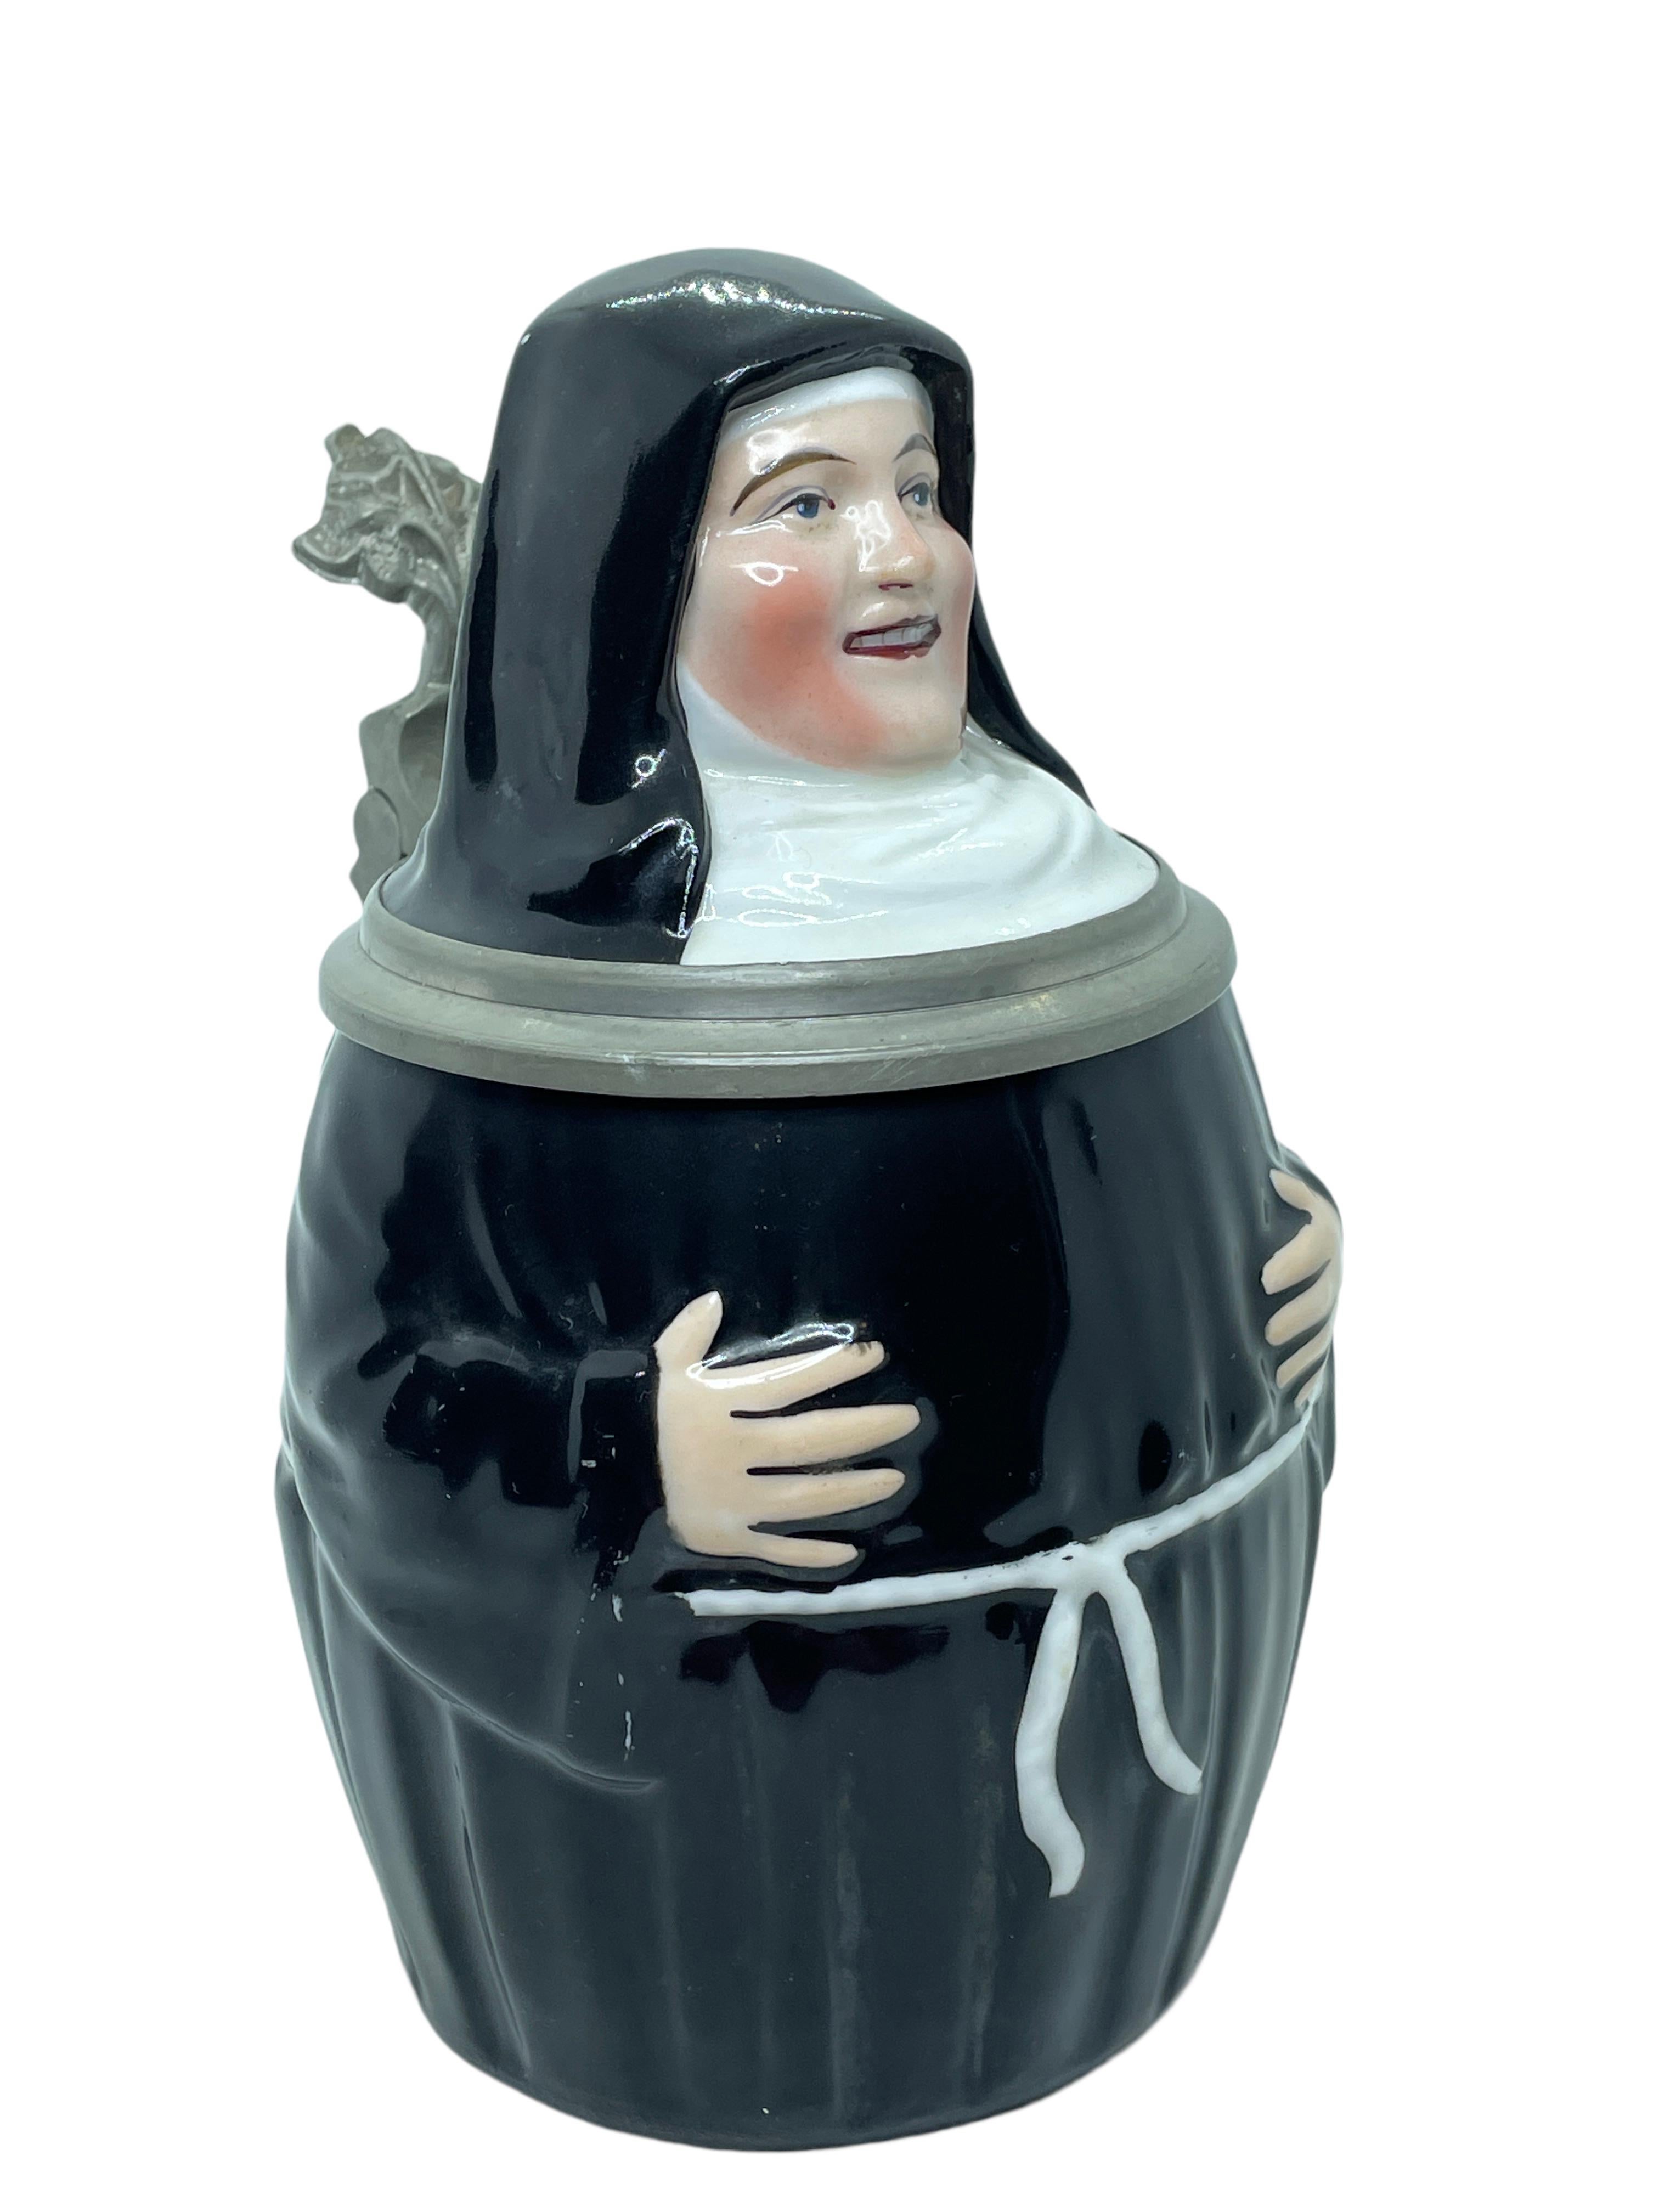 A gorgeous character beer stein - Nun. This character beer stein has been made in Germany circa 1900s by E. Bohne, Thuringia Germany. Absolutely gorgeous piece hand painted and still in great condition. Lid works properly. A nice addition to any